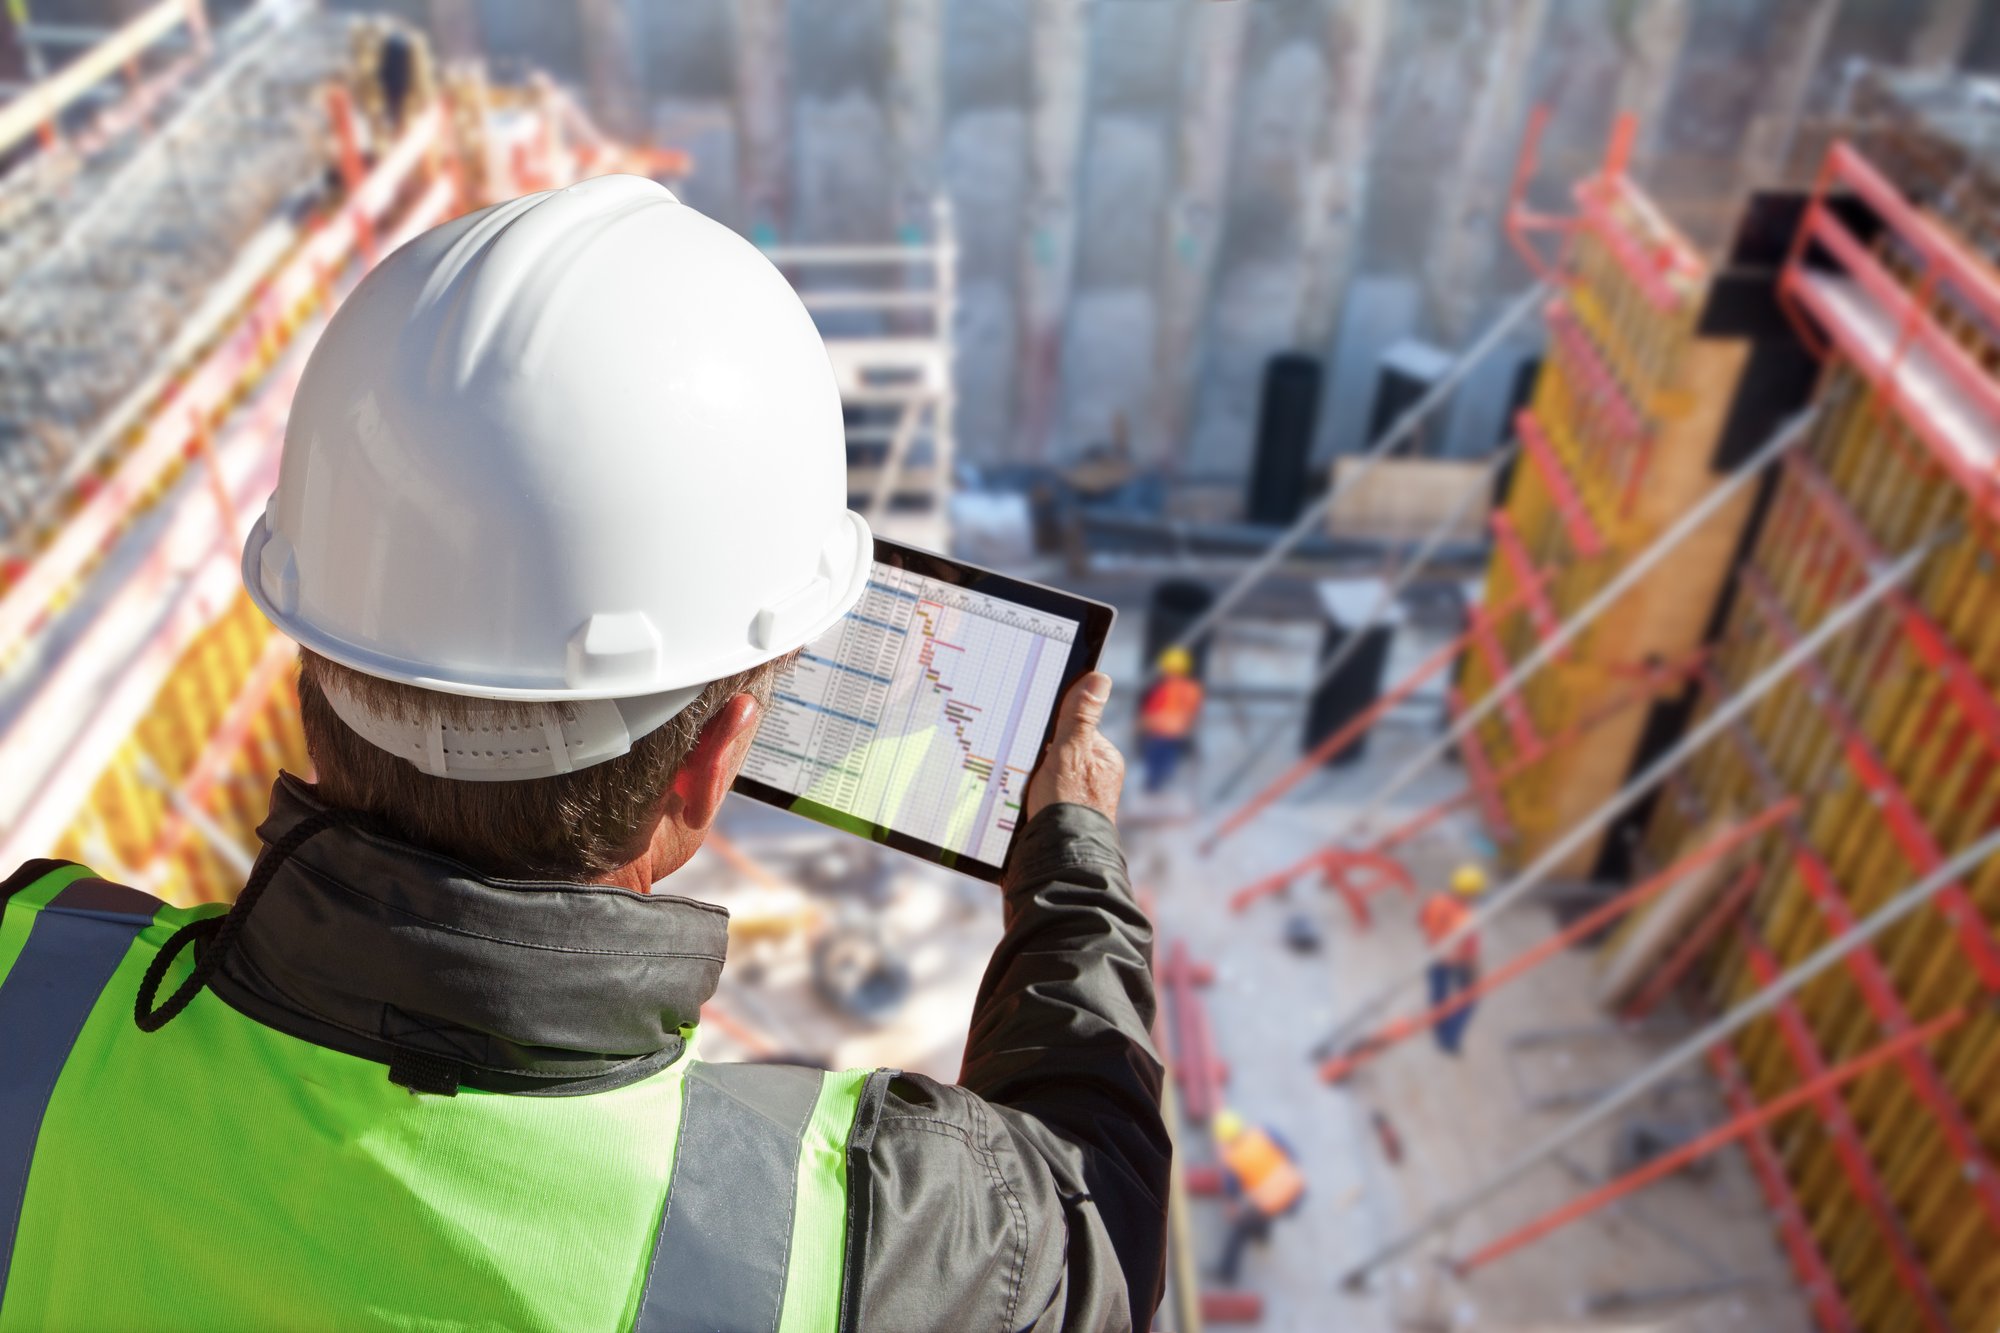  Image of a man looking at his tablet on a construction site, symbolizing GearTrack's ability to provide condition monitoring capabilities.